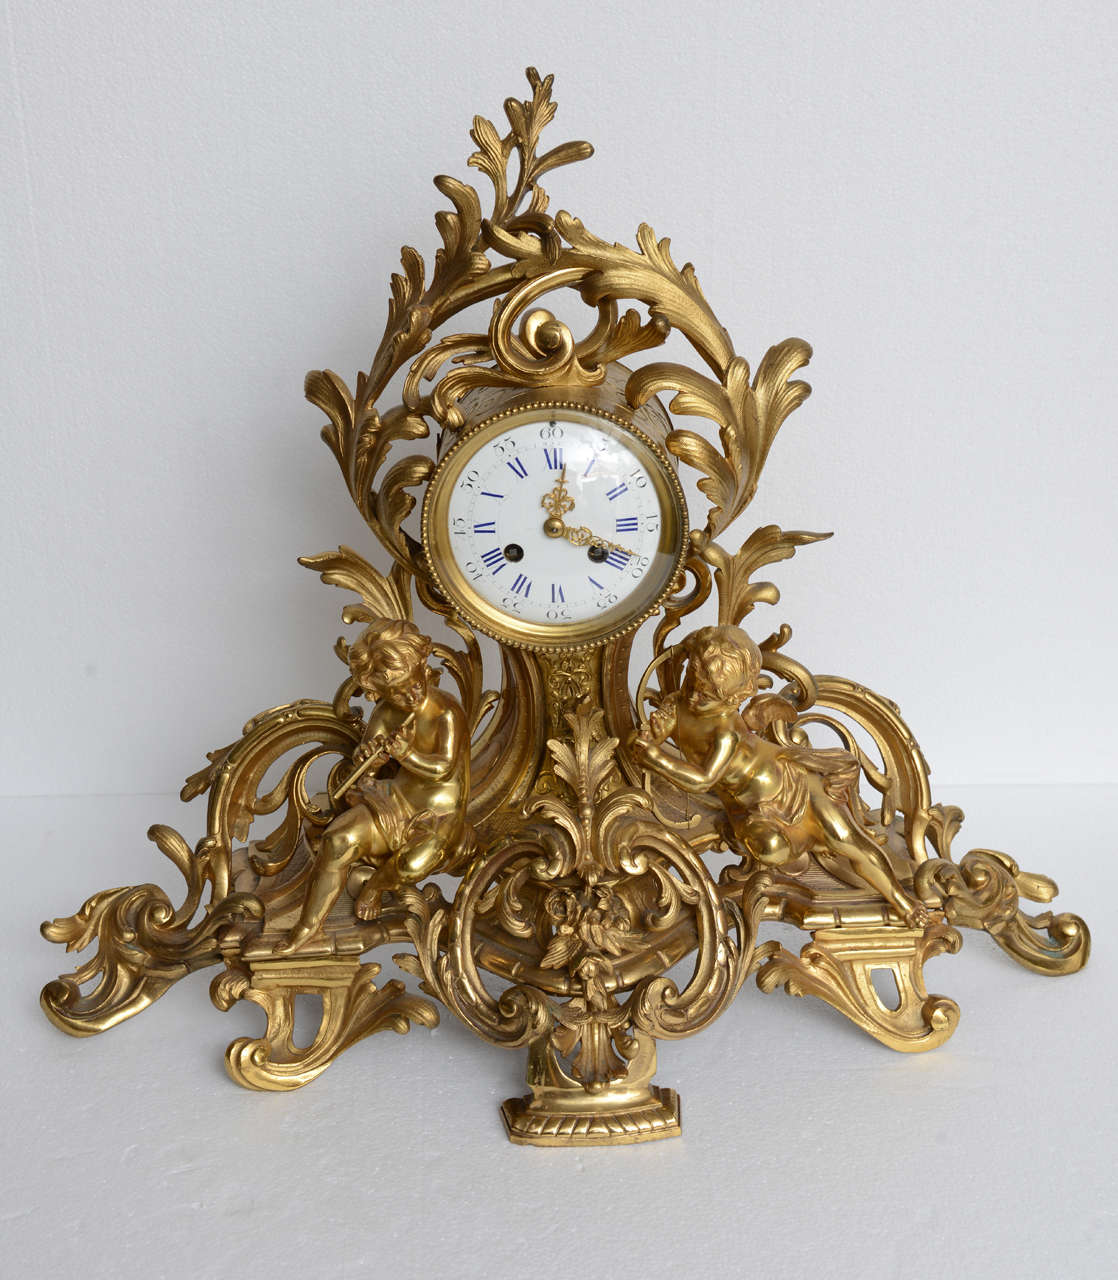 French Louis XV mantel clock with putti; finely cast with musical putti sitting on a rocaille form base, original restored finish, clock is working and keeps good time.